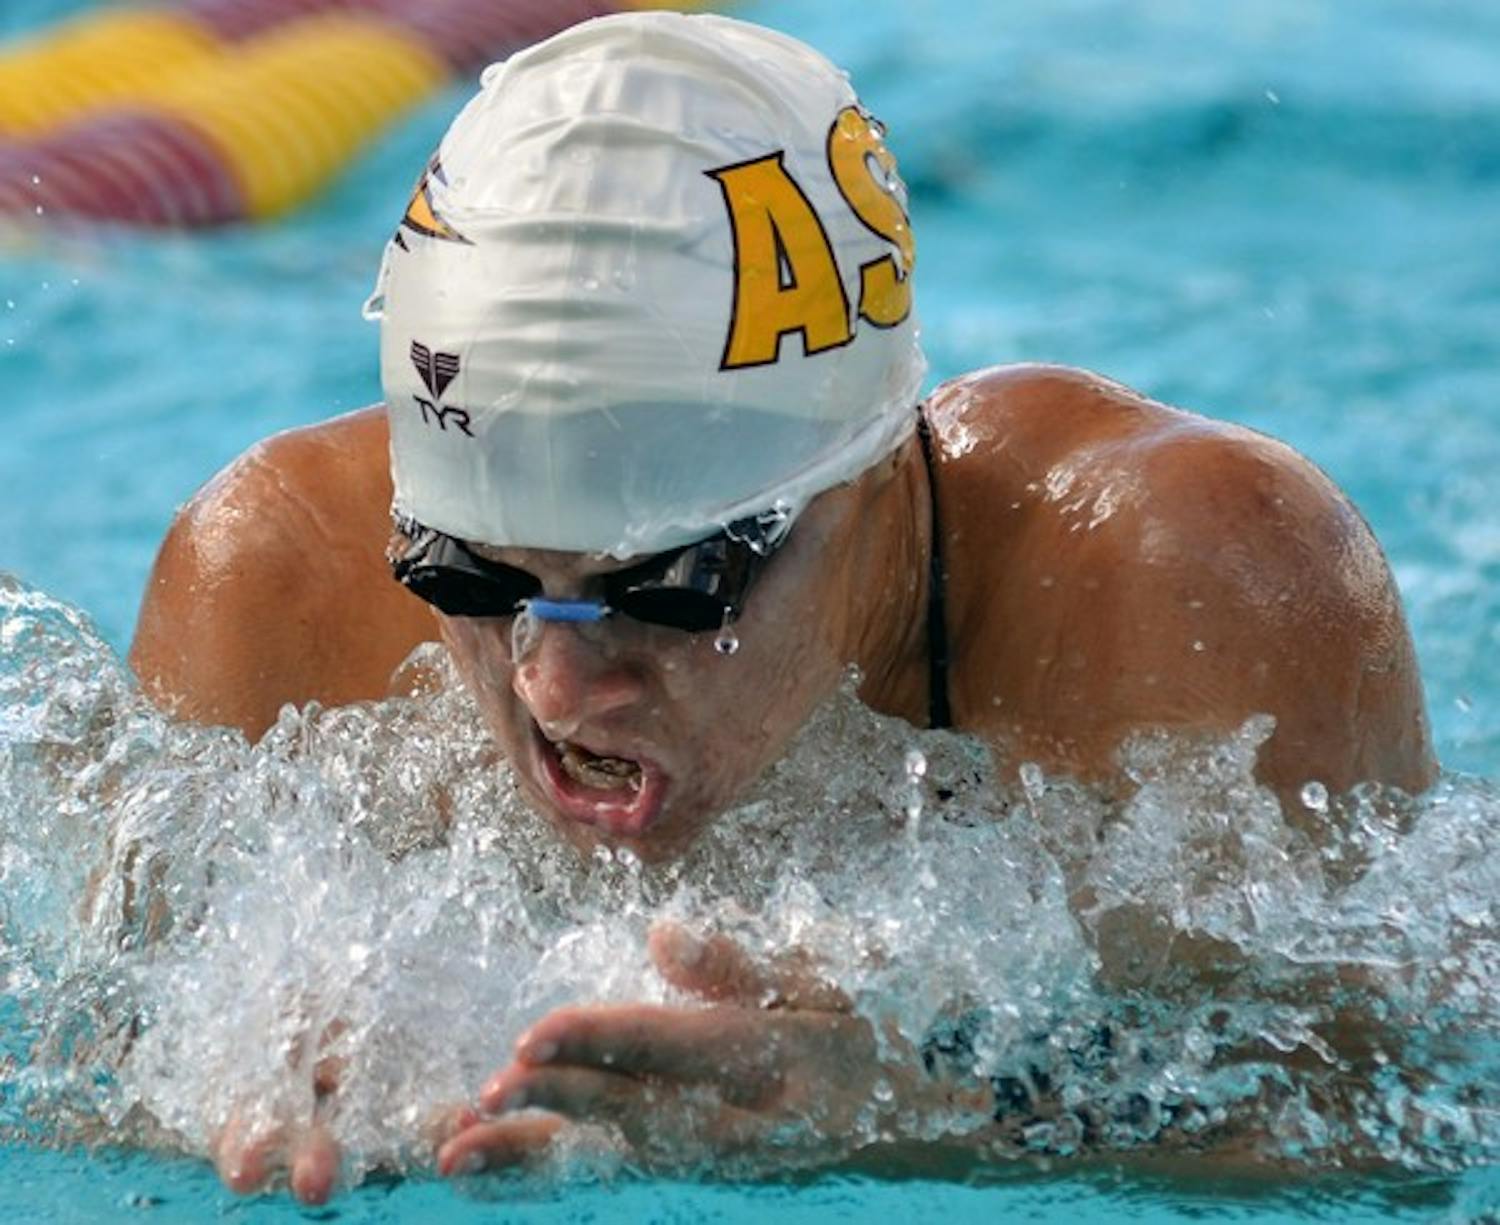 Rebecca Ejdervik competes in a meet against Wisconsin on Nov. 5, 2011. Ejdervik won the 100-meter breaststroke event against Cal on Saturday. (Photo by Aaron Lavinsky)